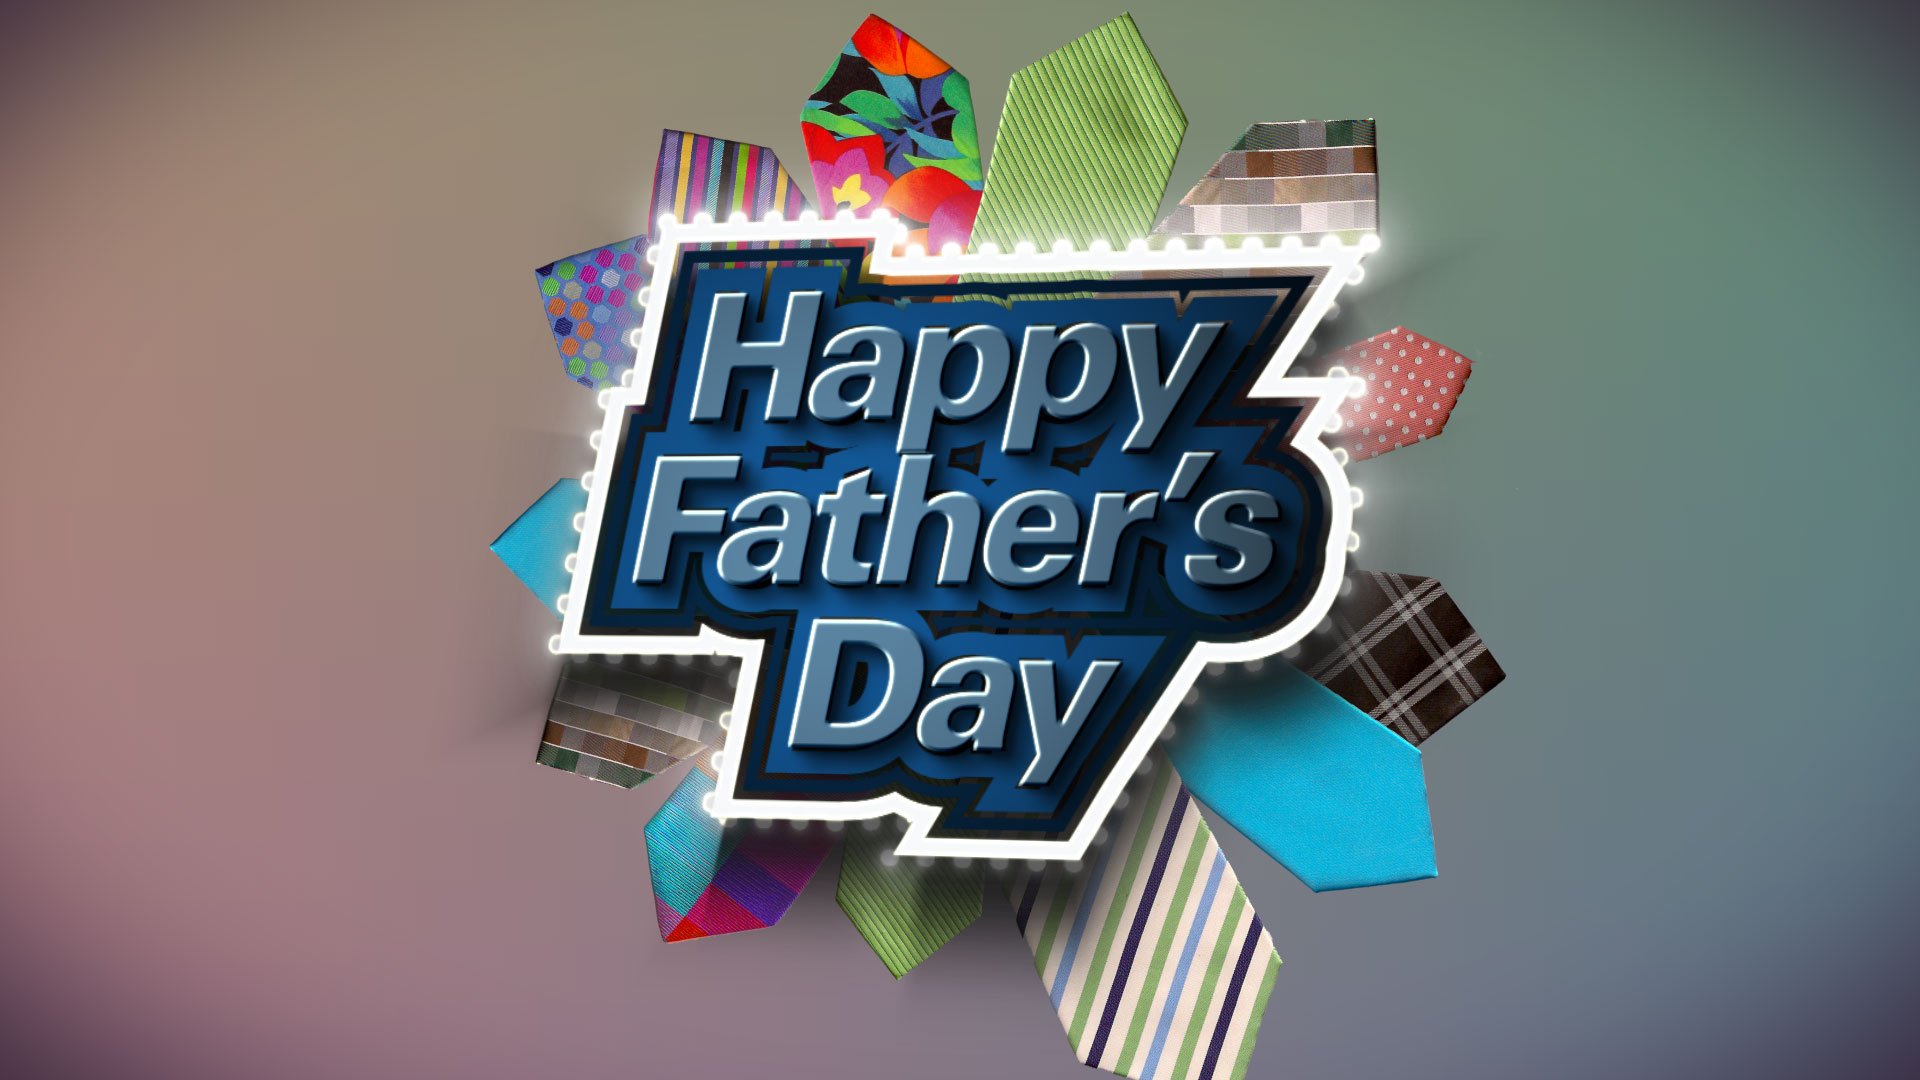 Download Holiday Father S Day Hd Wallpaper